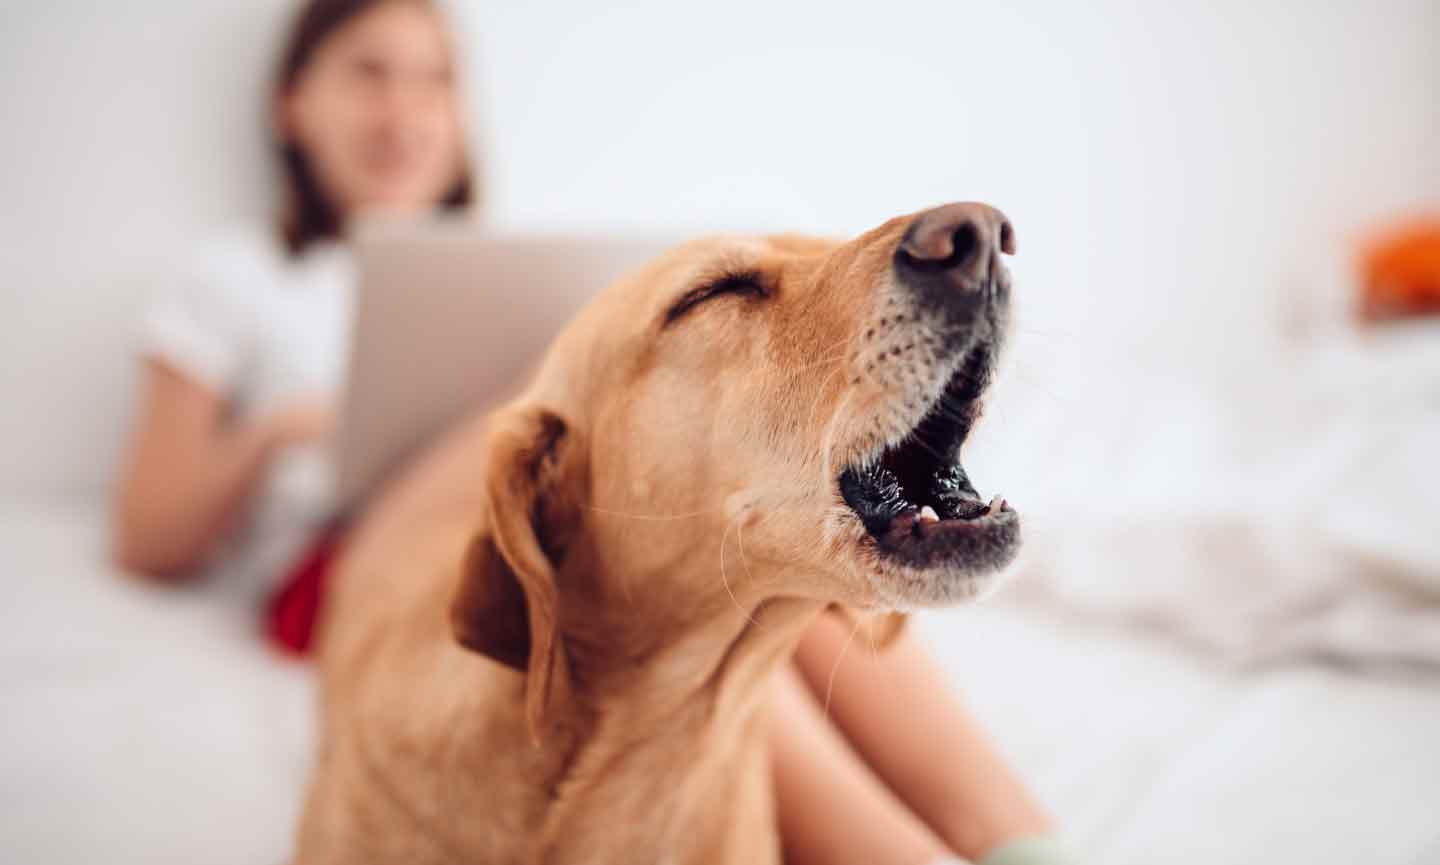 A dog barking. In the background, a woman sits with a laptop computer